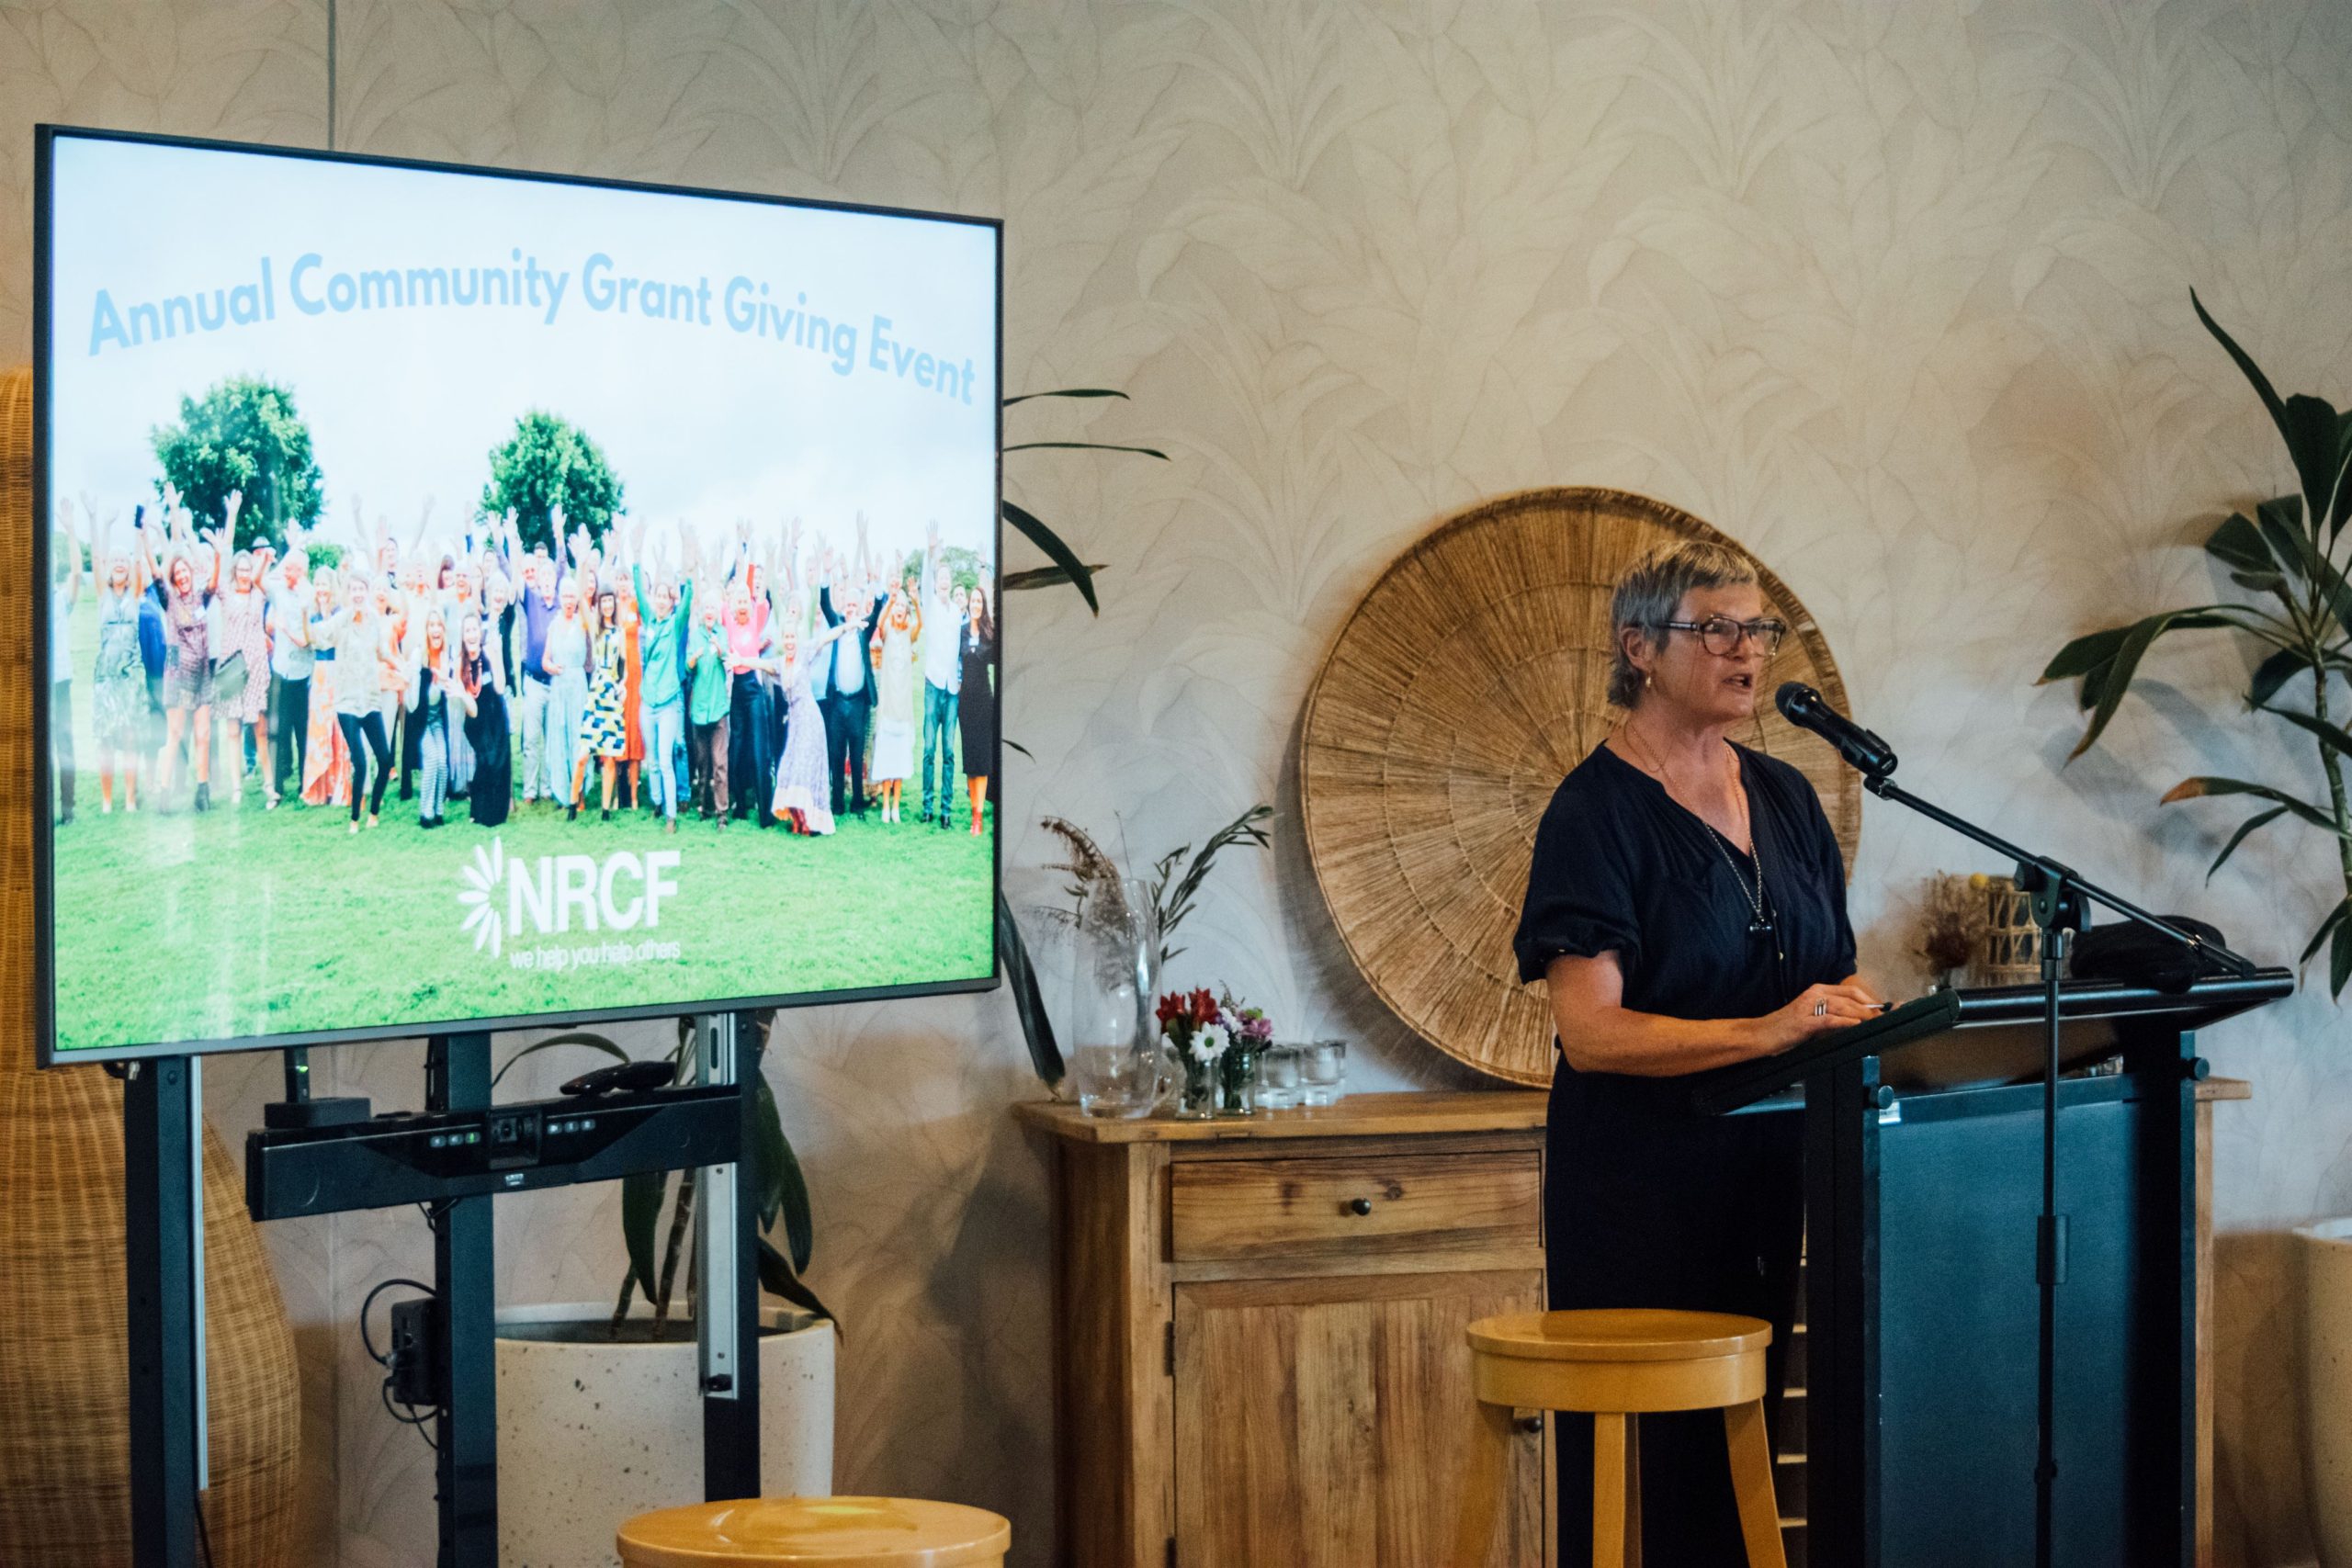 Nell Schofield - speaking at the NRCF Community Grant Giving Event 2022